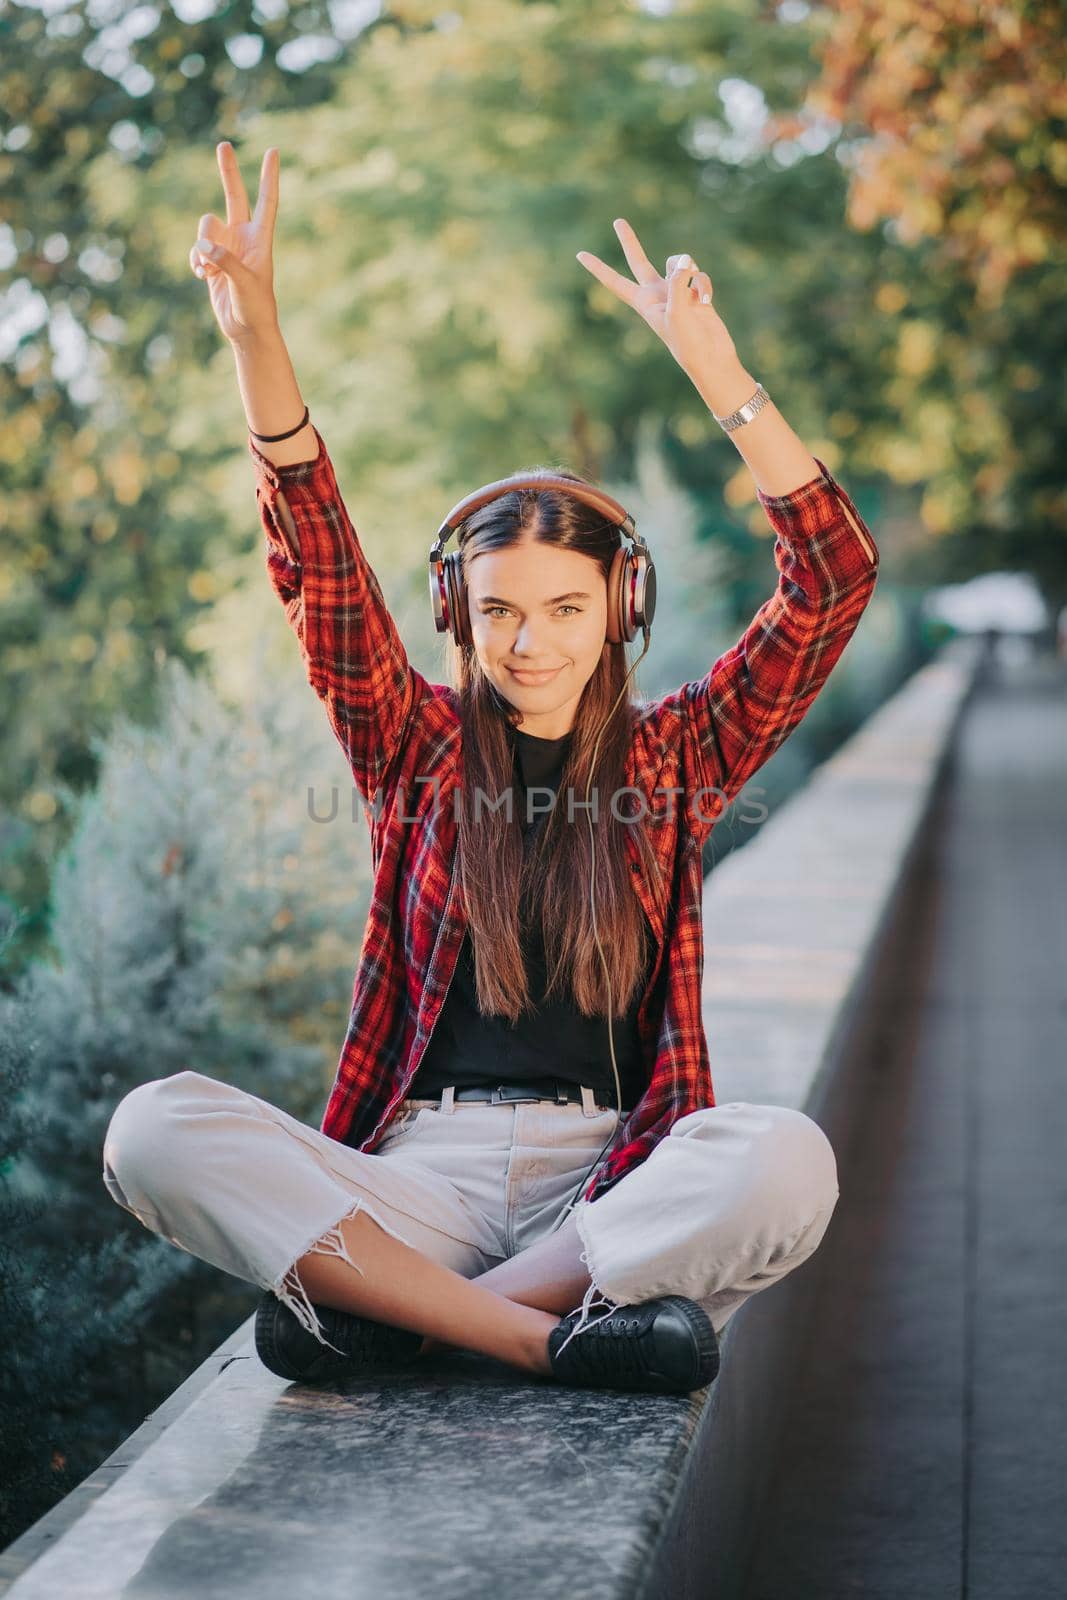 Young teenager listens to music through headphones in park.Girl in red plaid shirt smiles, dancing to rhythm.Concept of student life, freedom, modern youth.